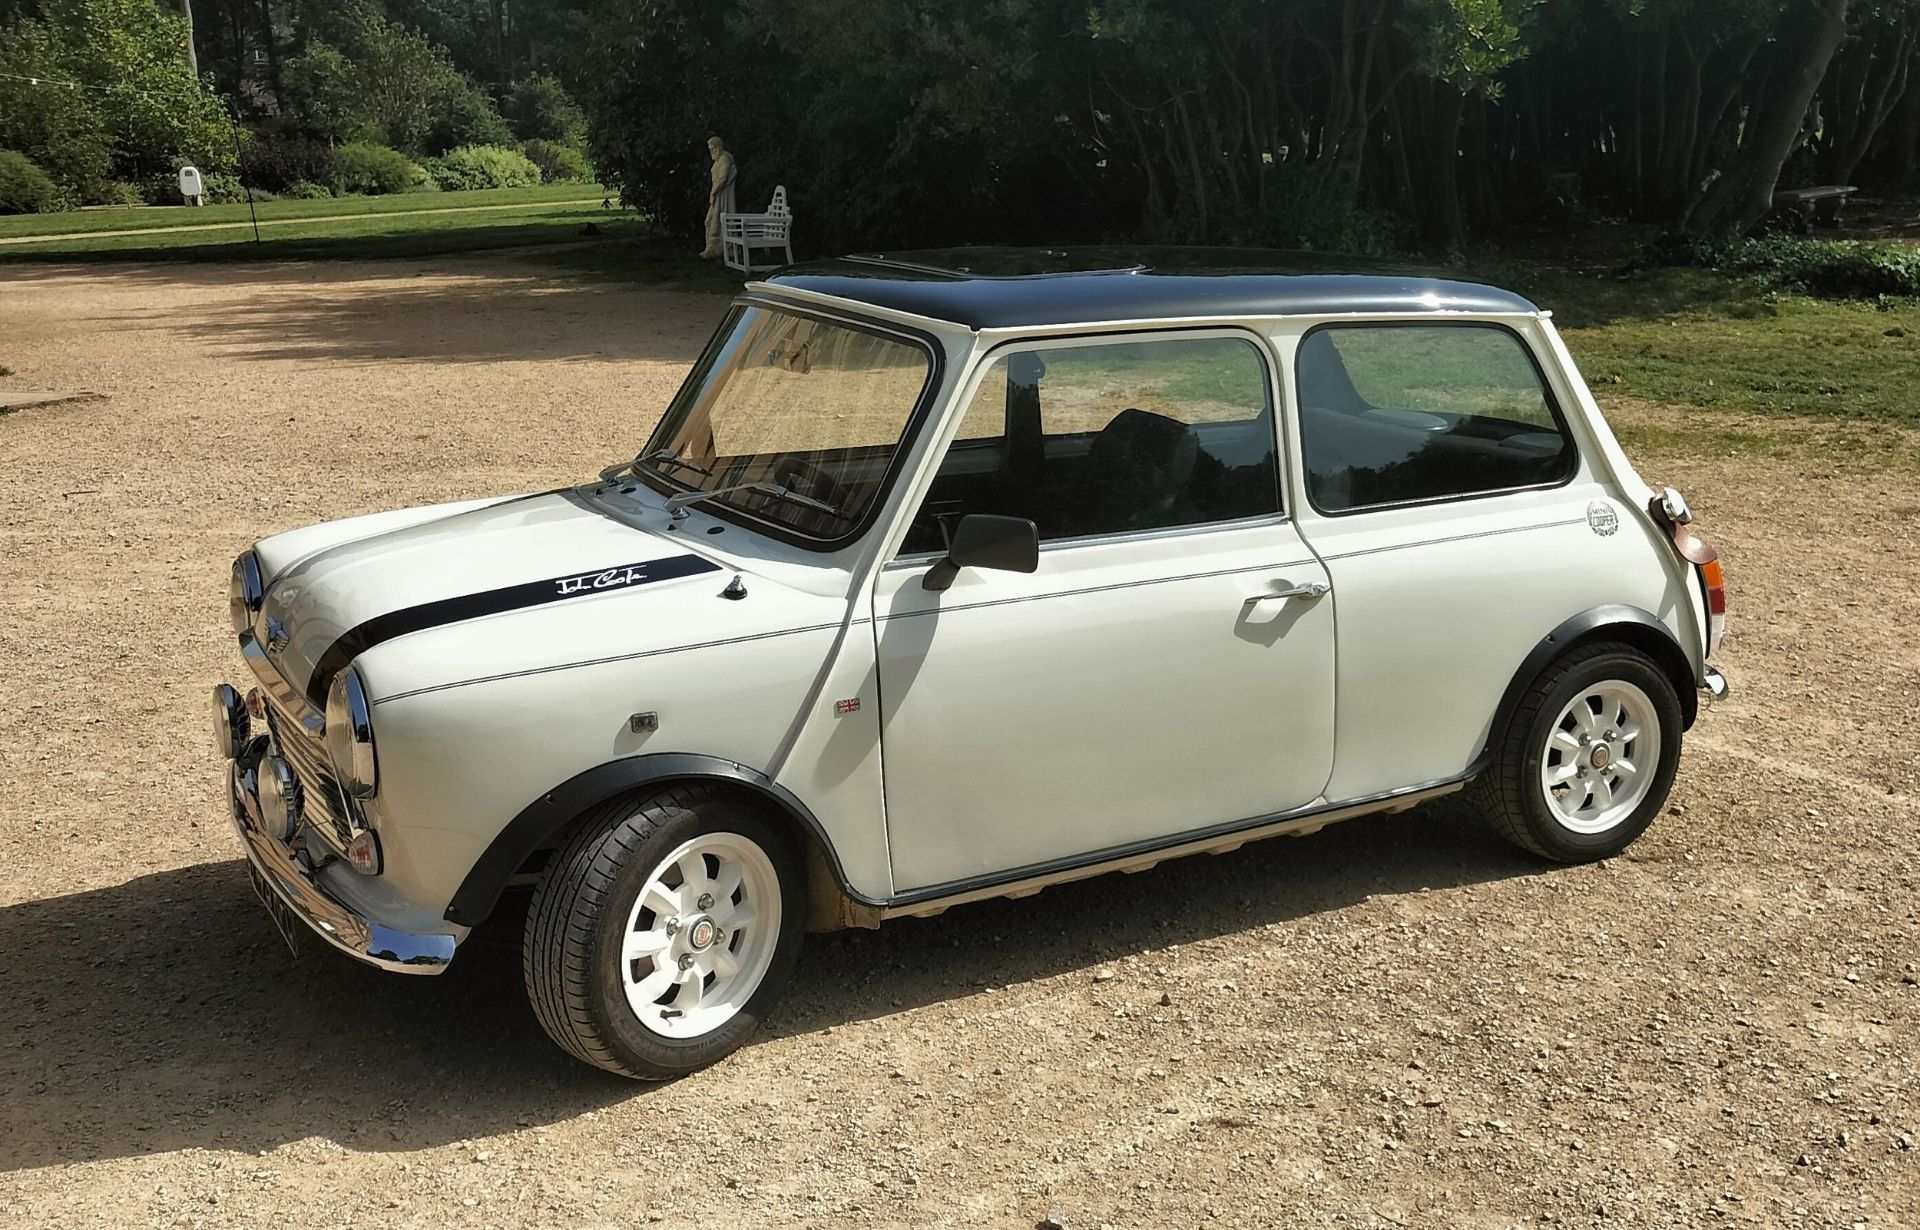 1992 ROVER MINI  Registration Number: J743 RFC Chassis Number: SAXXL2S1020509521 Launched in 1959, - Image 7 of 23